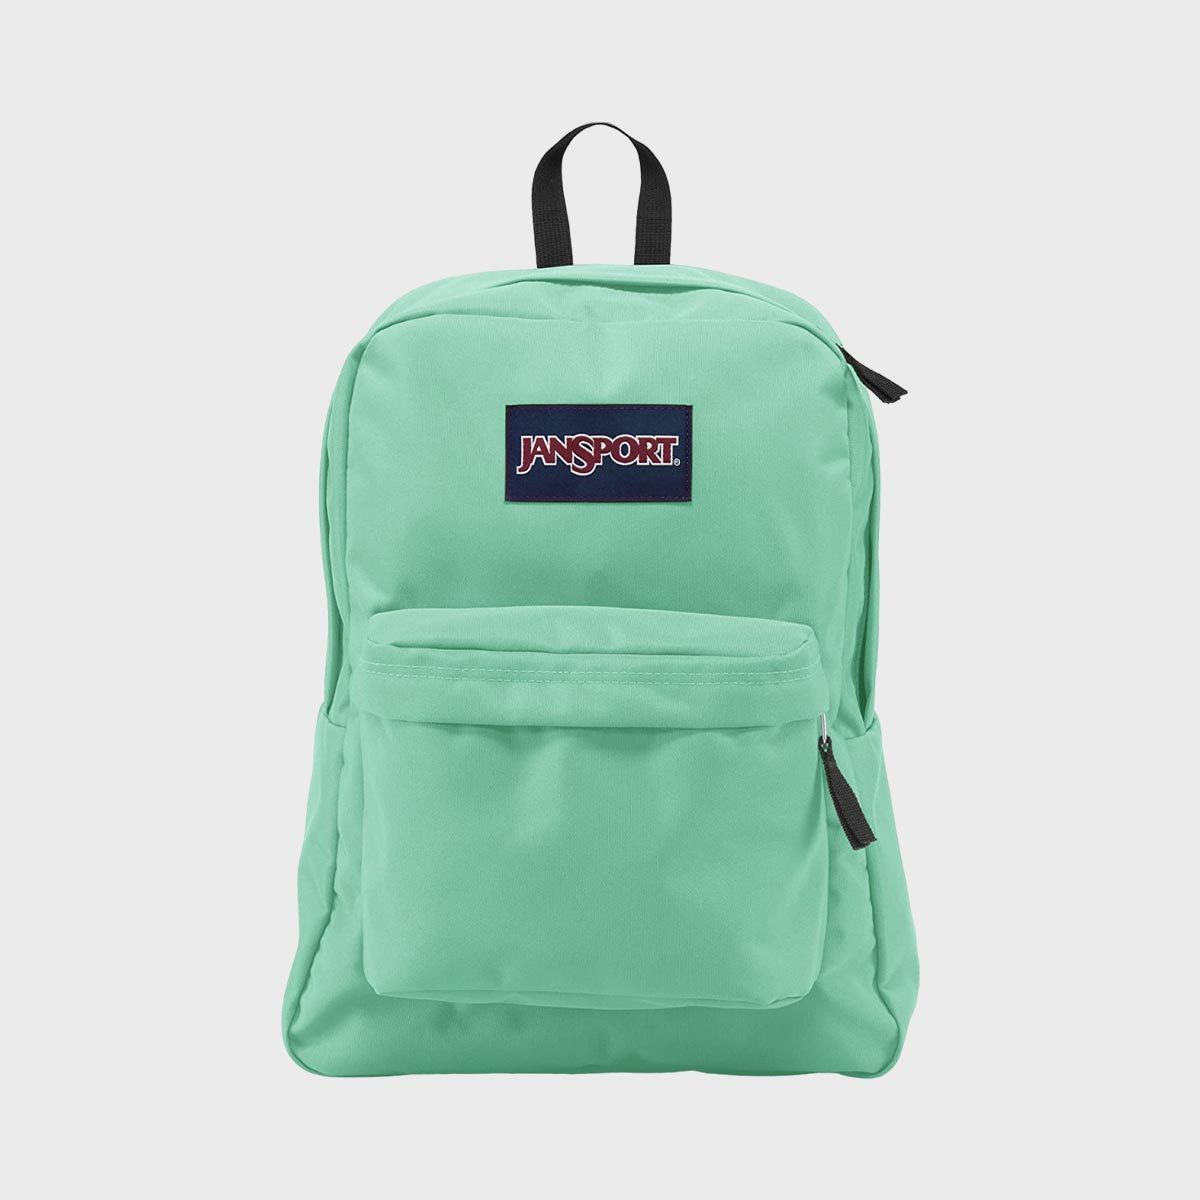 <h3 class="">JanSport SuperBreak One Backpack</h3> <p>Since 1967, JanSport has continued to churn out some of the best backpacks for a reason: The durable construction is meant to last, and the <a href="https://www.rd.com/list/cheap-luggage/" rel="noopener noreferrer">affordable price point</a> can't be beat. This lightweight best travel backpack only weighs 10.6 ounces and is simple, yet sturdy. The classic design of this <a href="https://www.amazon.com/dp/B09F1S75GK/" rel="noopener noreferrer">JanSport backpack</a> boasts spacious storage in the main compartment, a front utility pocket with a built-in organizer, a coated interior, a web haul handle and padded shoulder straps.</p> <p>"...[I] have taken it hiking, camping, traveled to multiple countries with it, subjected it many times to being stuffed to bursting and weighed down probably to 20+ pounds, and four years later, the only sign of significant wear that it shows is one tiny hole along one of the seams on the back," writes verified purchaser, <a href="https://www.amazon.com/gp/customer-reviews/R1SZOE9DRHRJ96/" rel="noopener noreferrer">Katharine Hogan</a>.</p> <p><strong>Pros</strong></p> <ul> <li class="">Only weighs 10.6 ounces</li> <li class="">Affordable</li> <li class="">Water-repellent and abrasion-resistant fabric</li> <li class="">Available in 20 colors and prints</li> <li class="">Padded back panel and shoulder straps</li> </ul> <p><strong>Cons</strong></p> <ul> <li class="">Main compartment doesn't have much organization</li> </ul> <p class="listicle-page__cta-button-shop"><a class="shop-btn" href="https://www.amazon.com/dp/B09F1S75GK/">Shop Now</a></p>